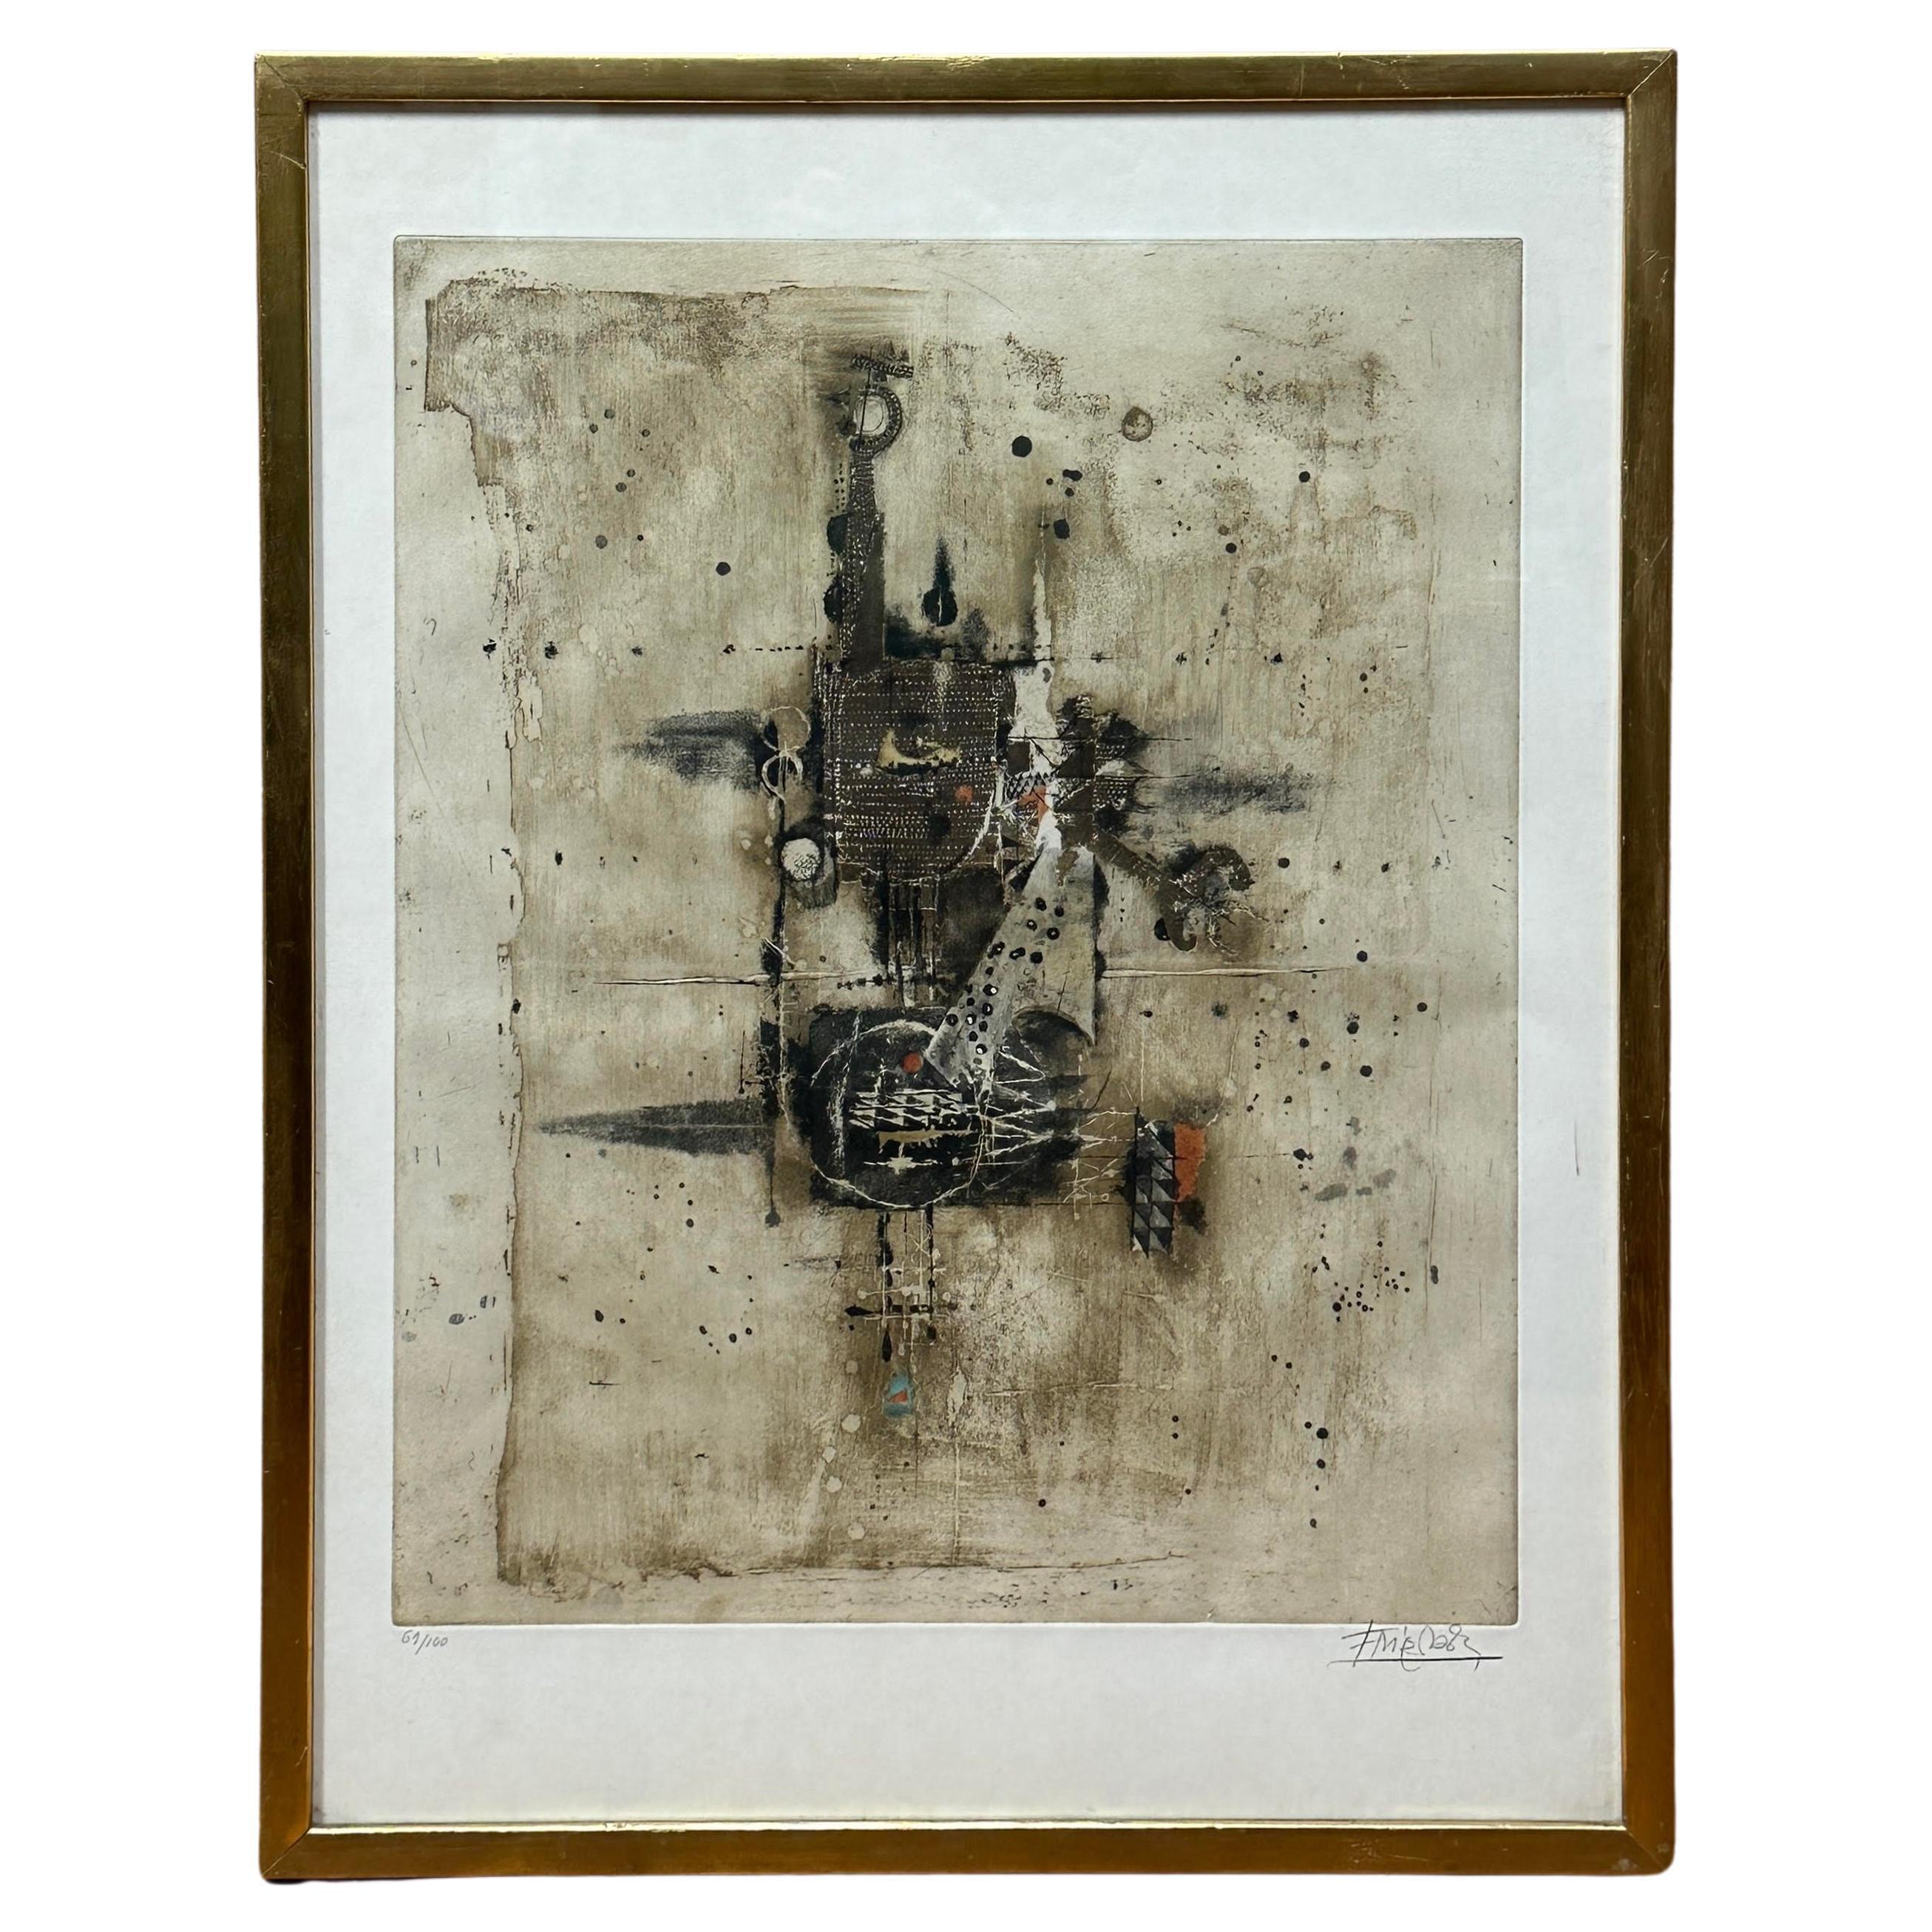 Johnny Friedlaender Abstract Print - "Metallurgic Symphony" Beige and Grey Abstract by Johnny Friedlander